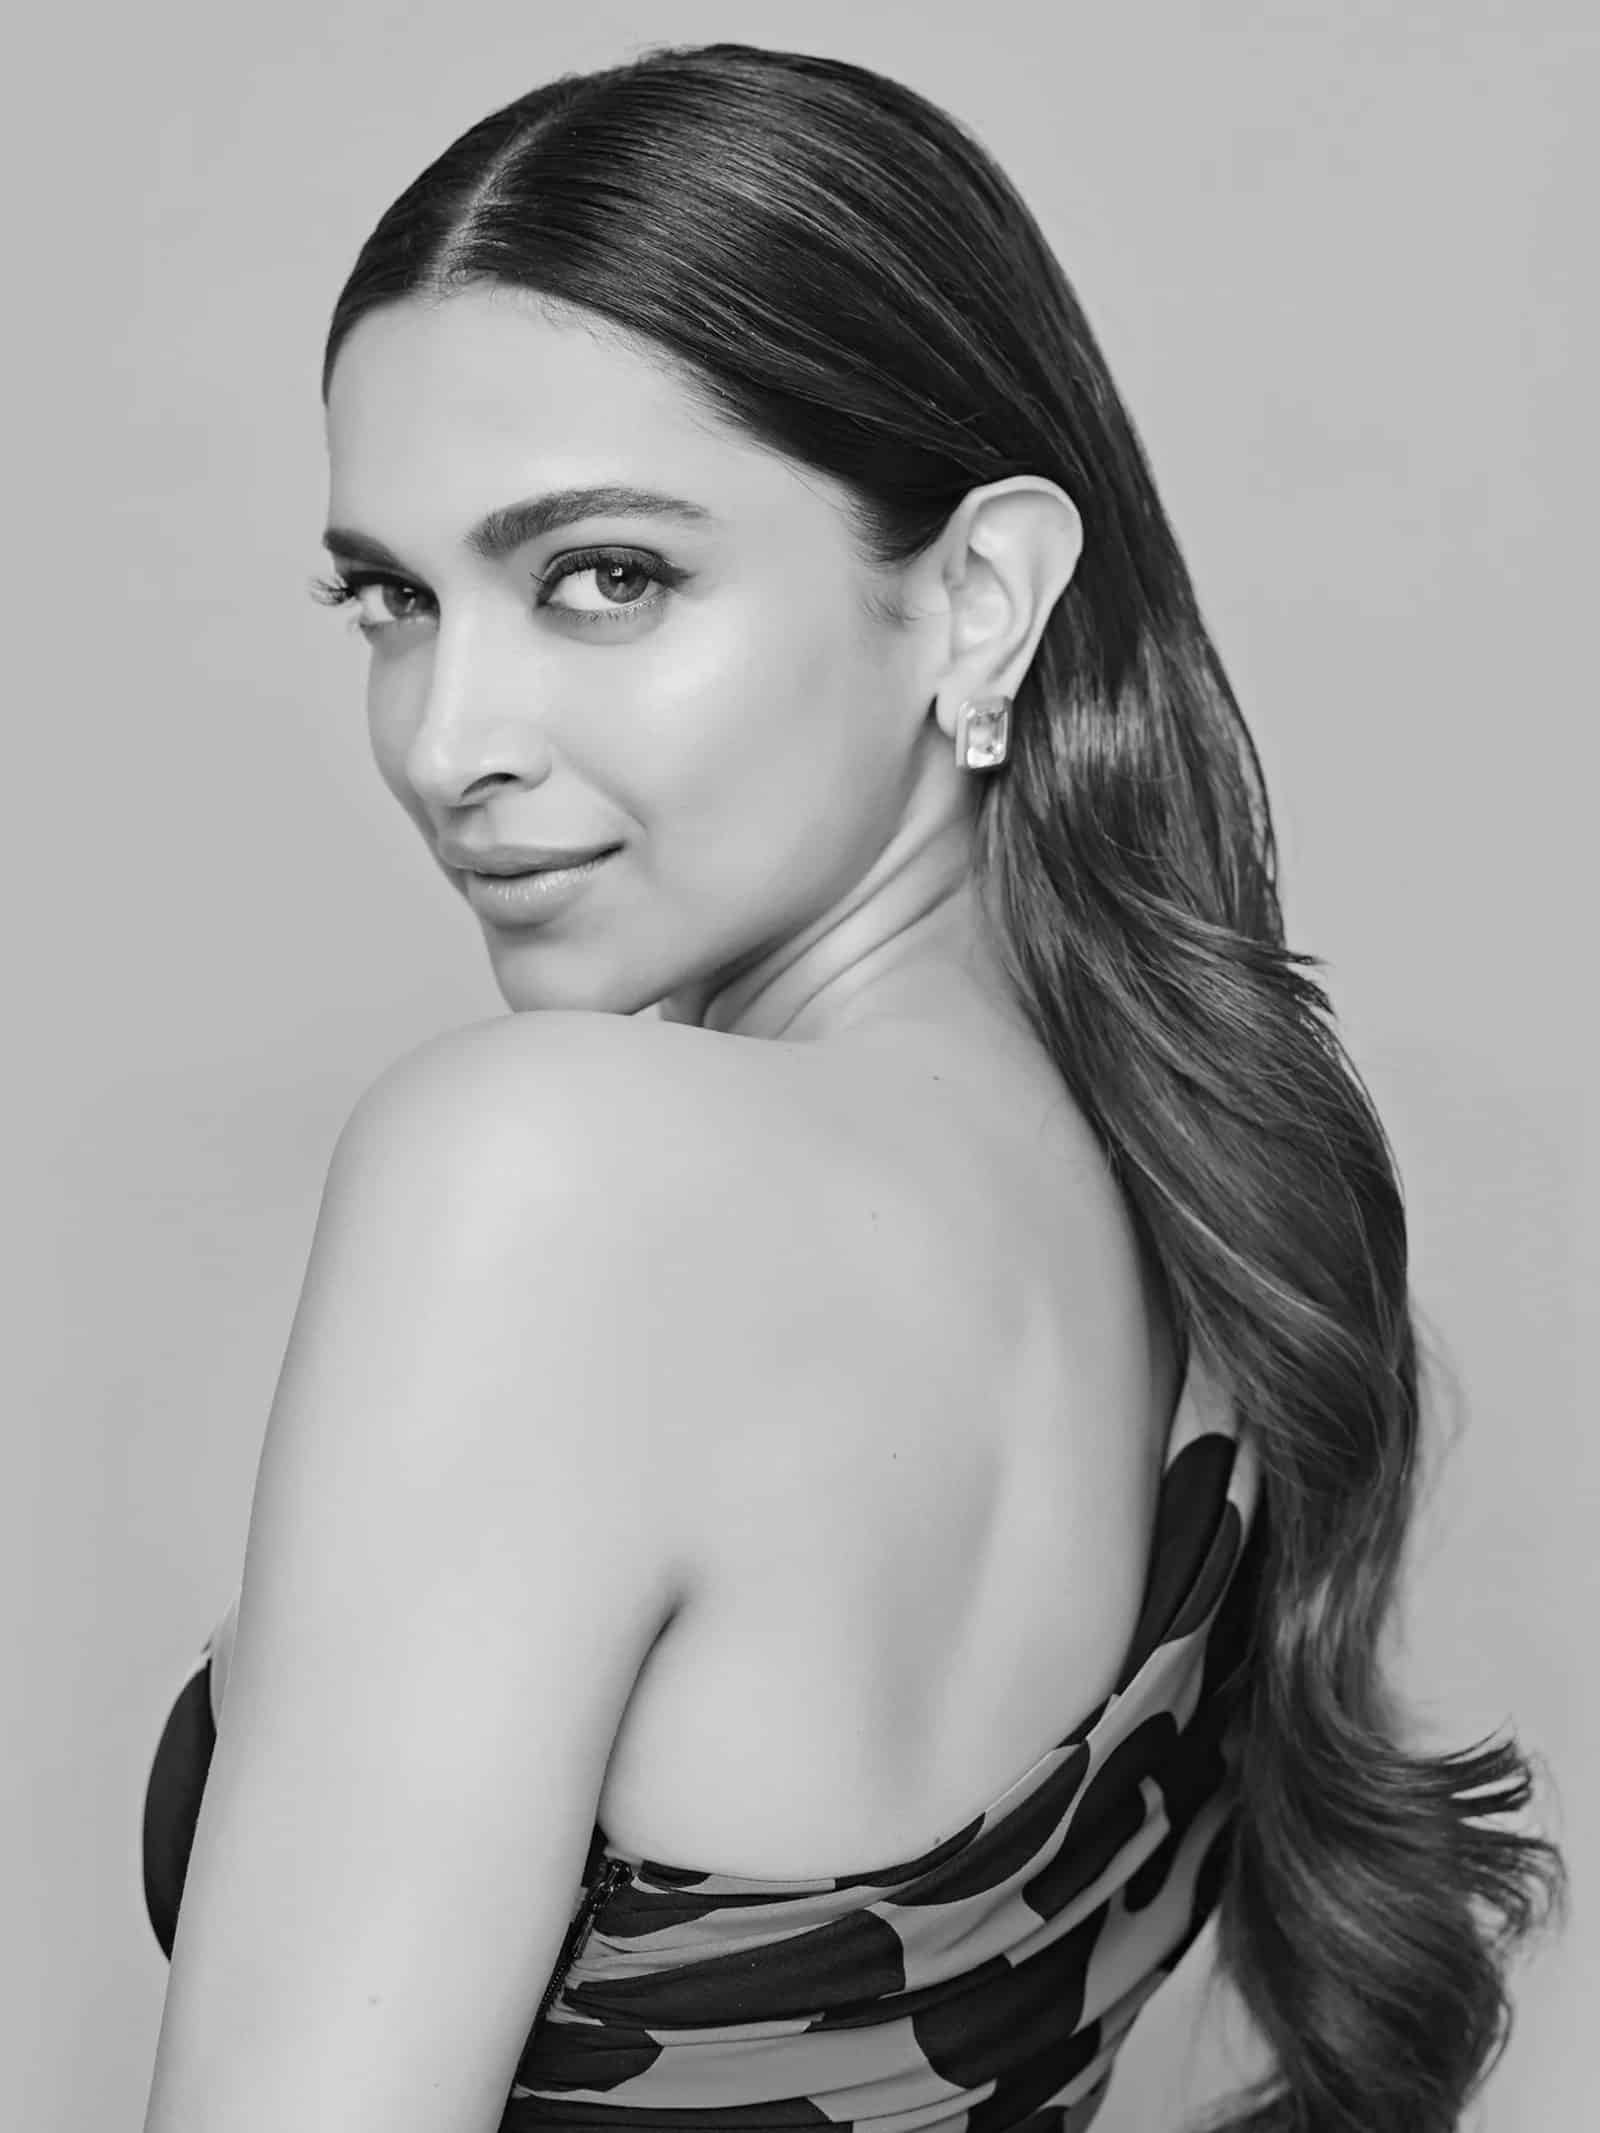 Deepika Padukone becomes first Bollywood star to model for Louis